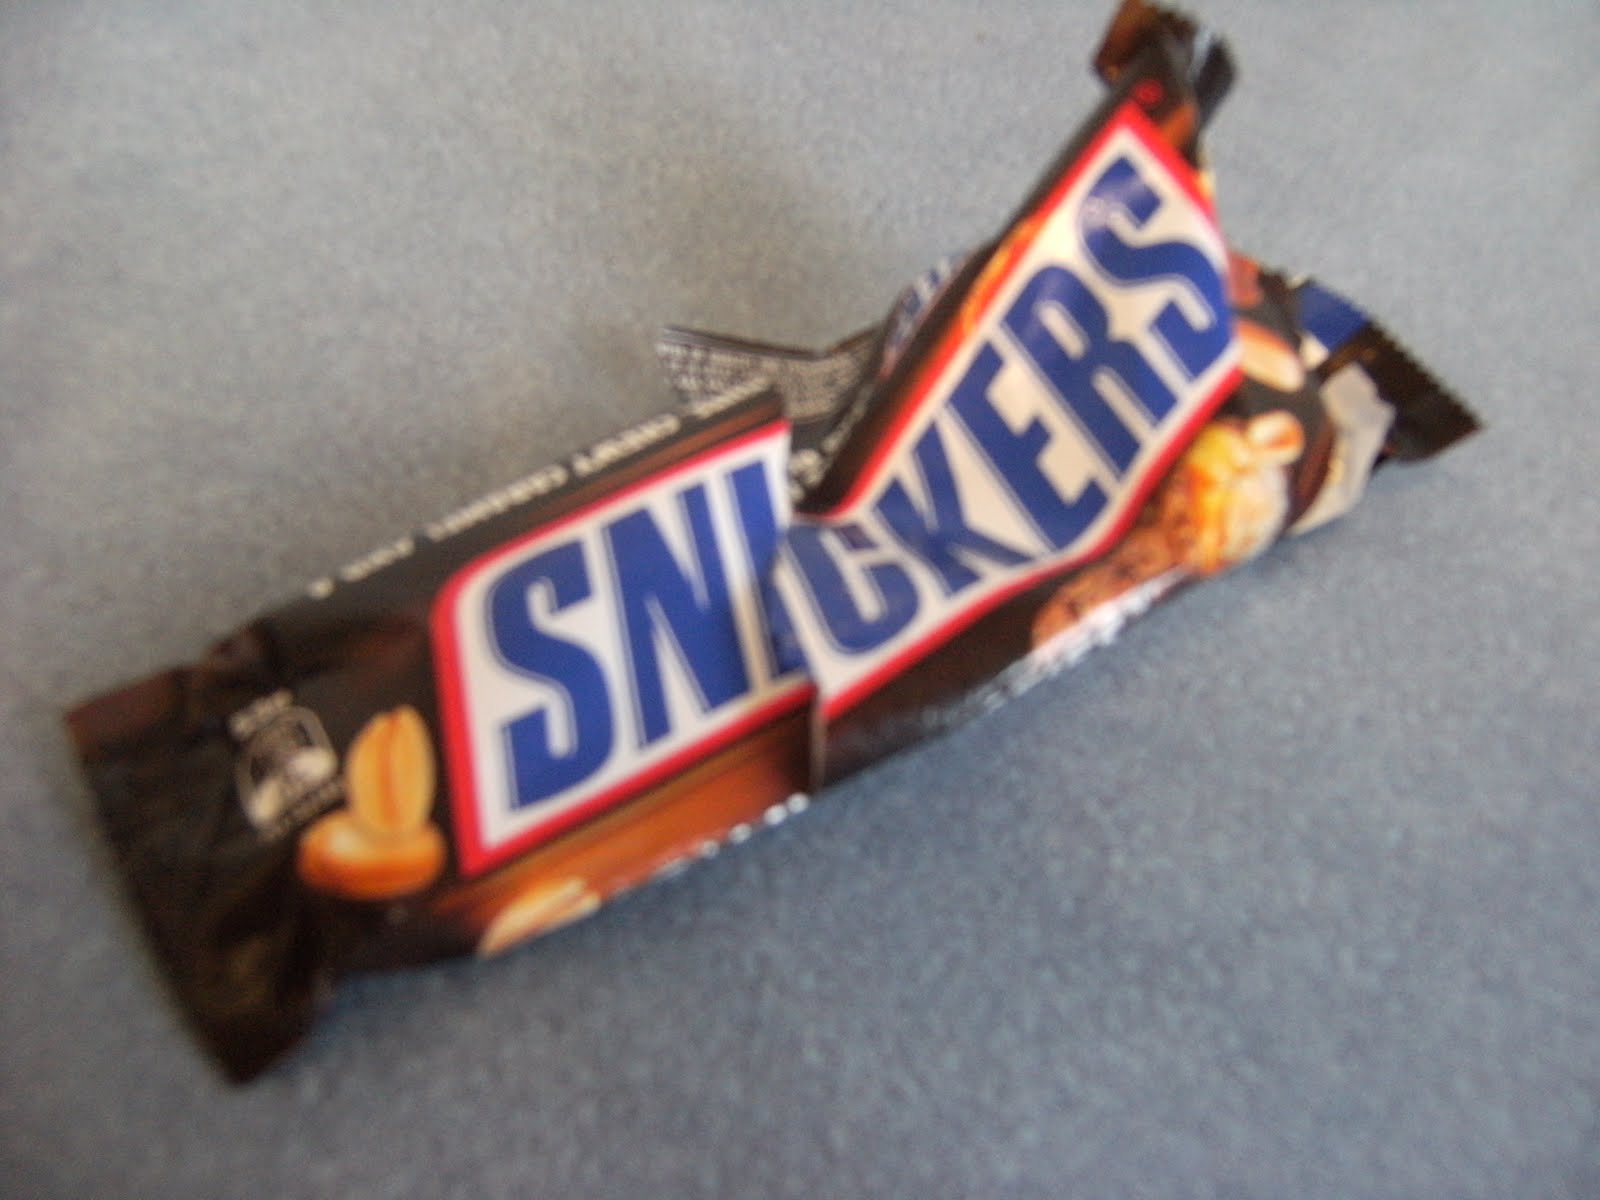 Snickers Really Satisfies